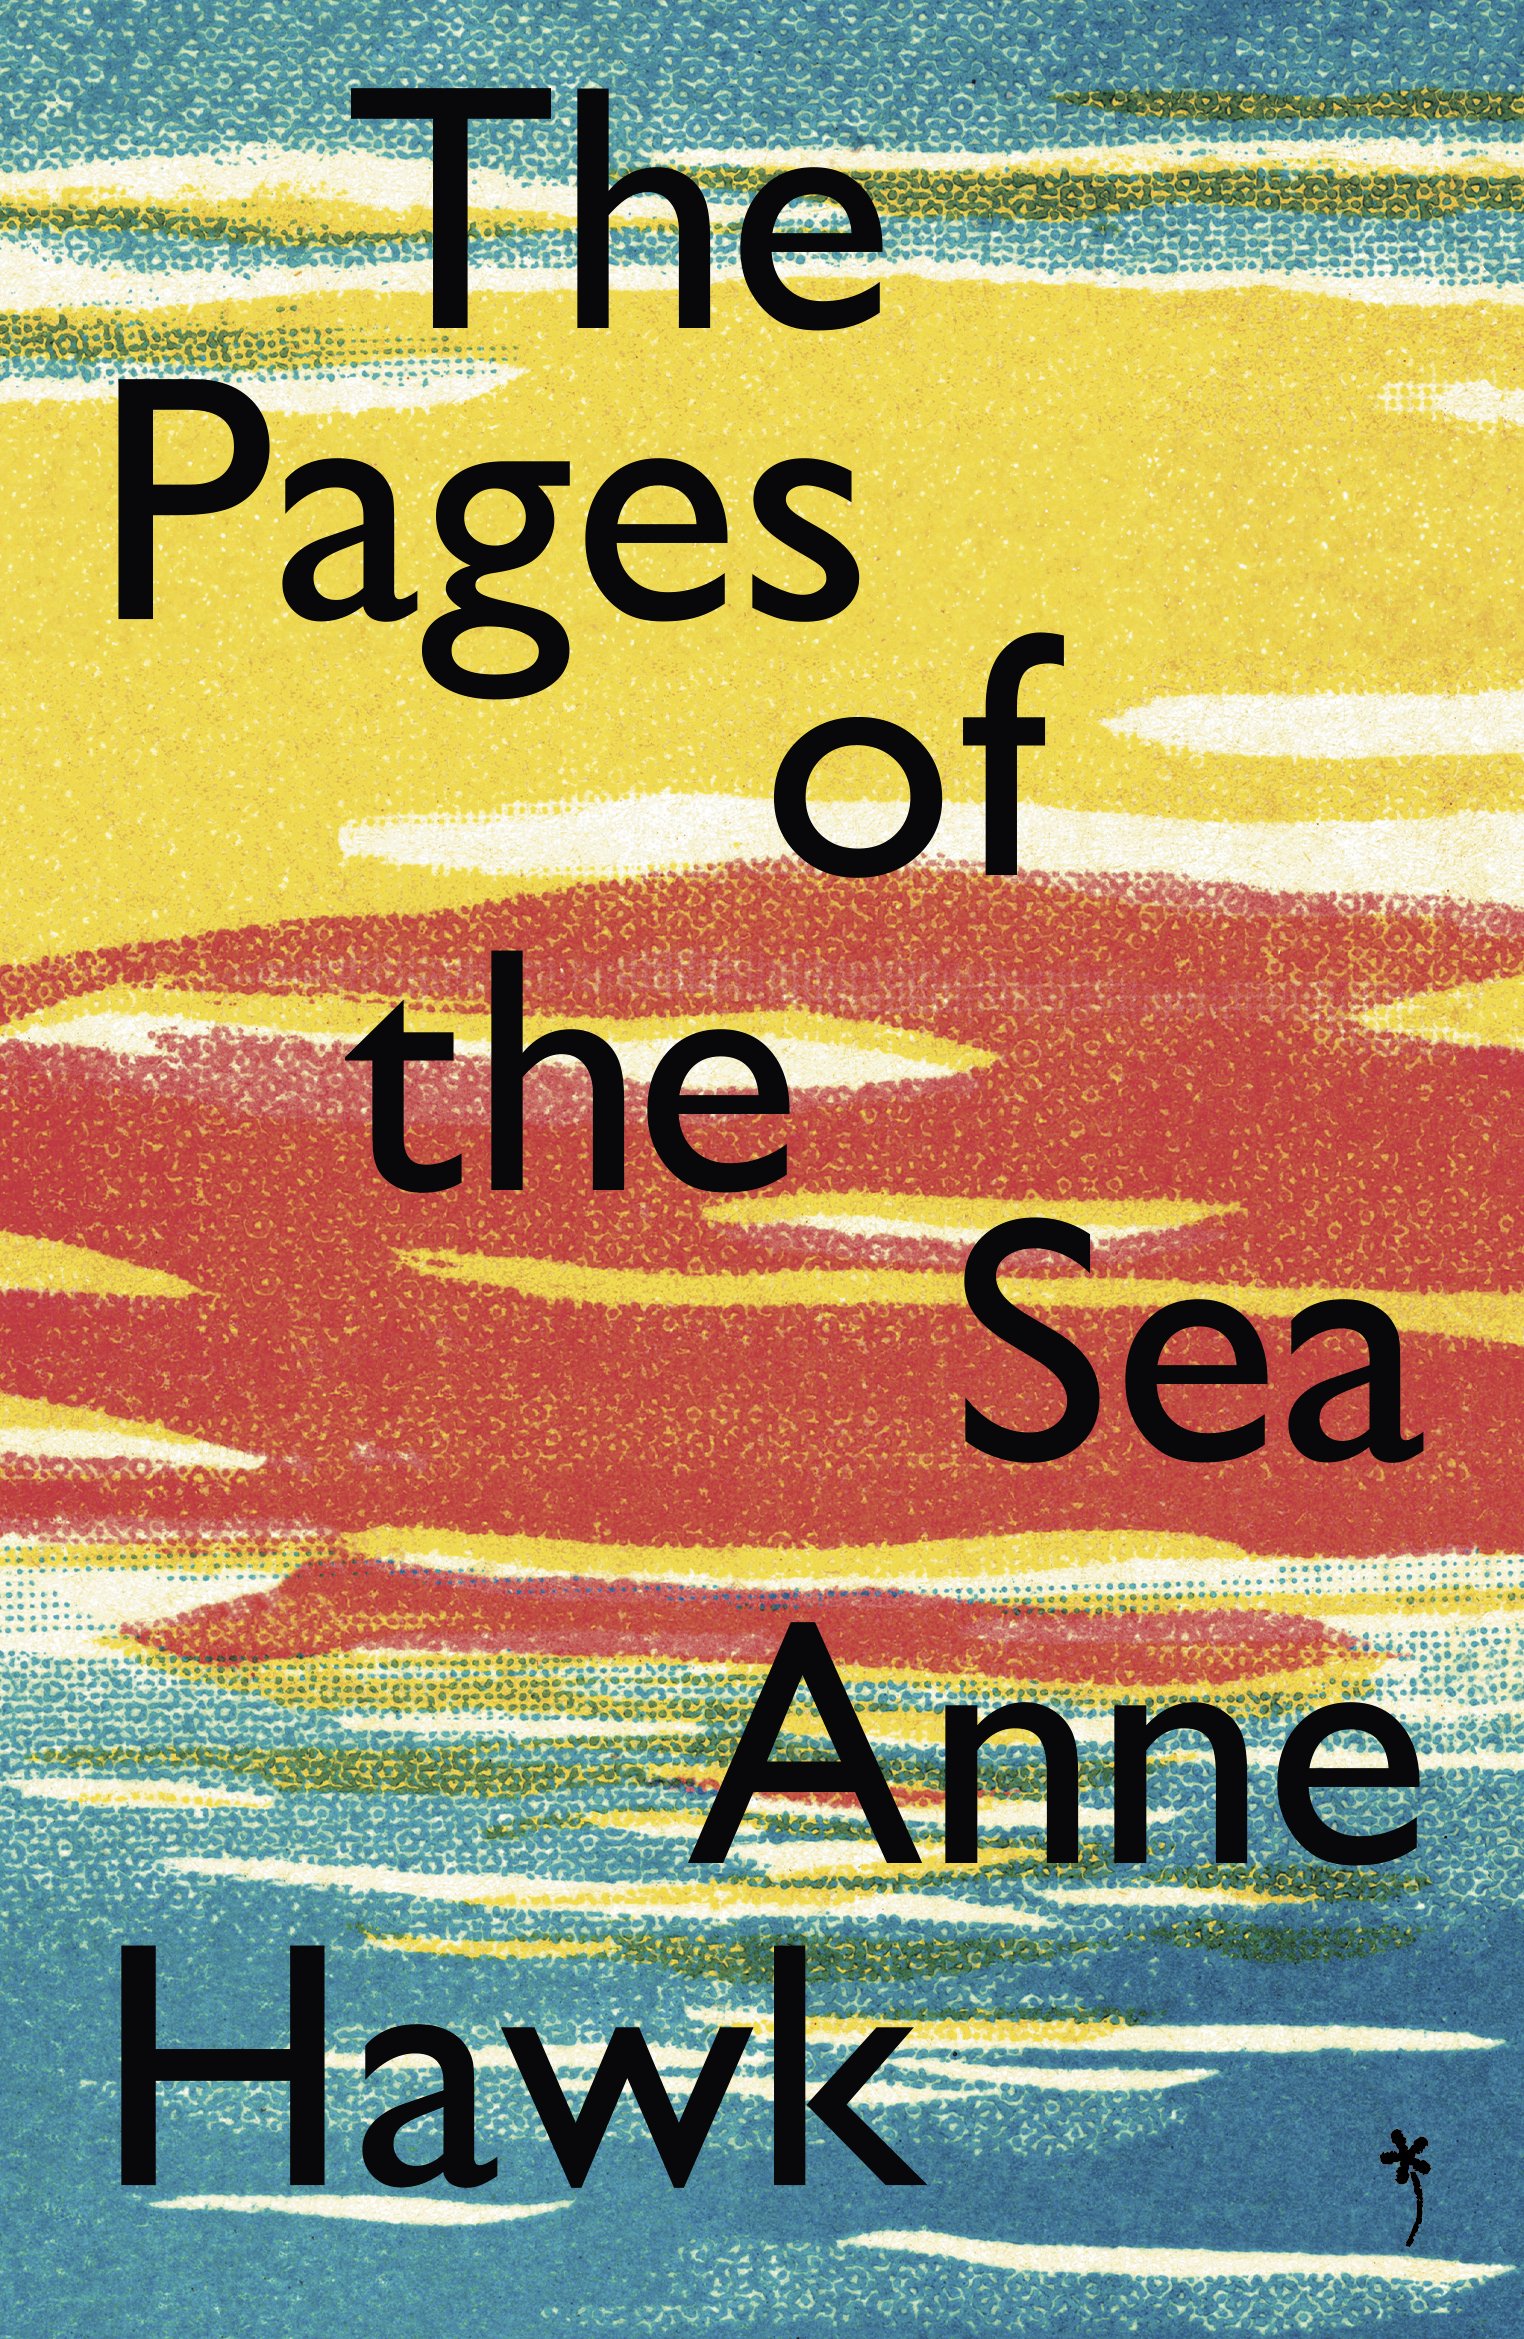 Pages of the Sea.jpg